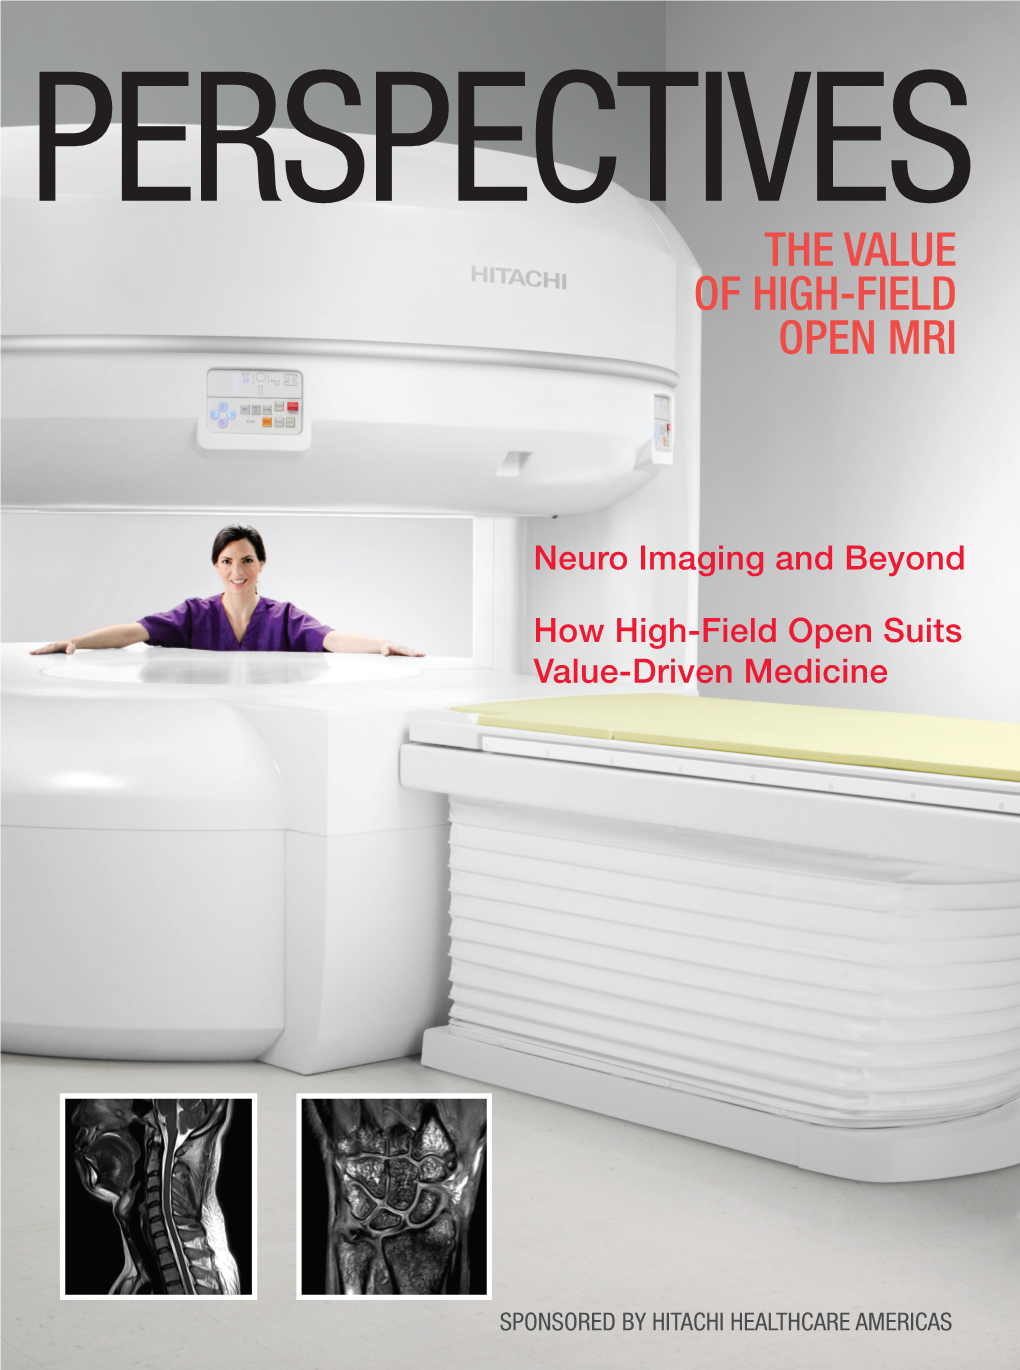 The Value of High-Field Open Mri